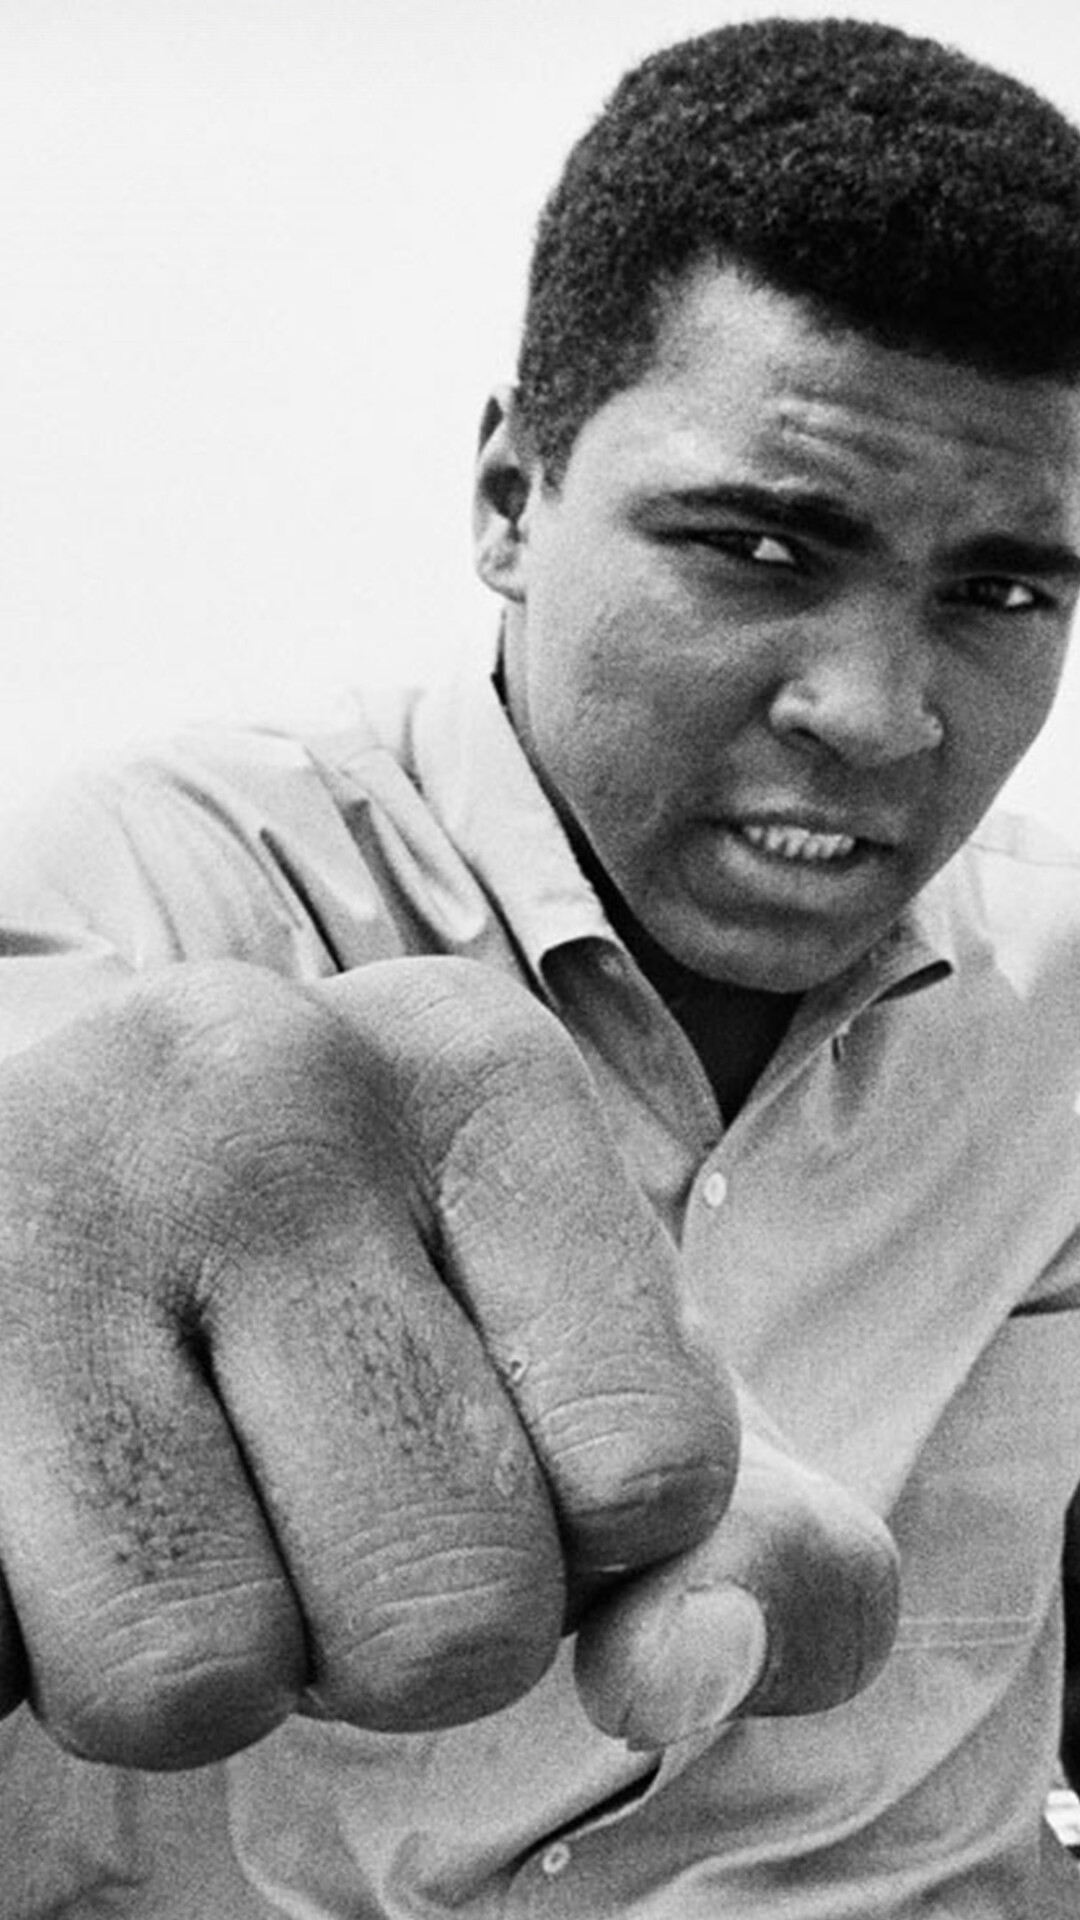 Muhammad Ali: He beat his former trainer and veteran boxer Archie Moore in a 1962 match. 1080x1920 Full HD Wallpaper.